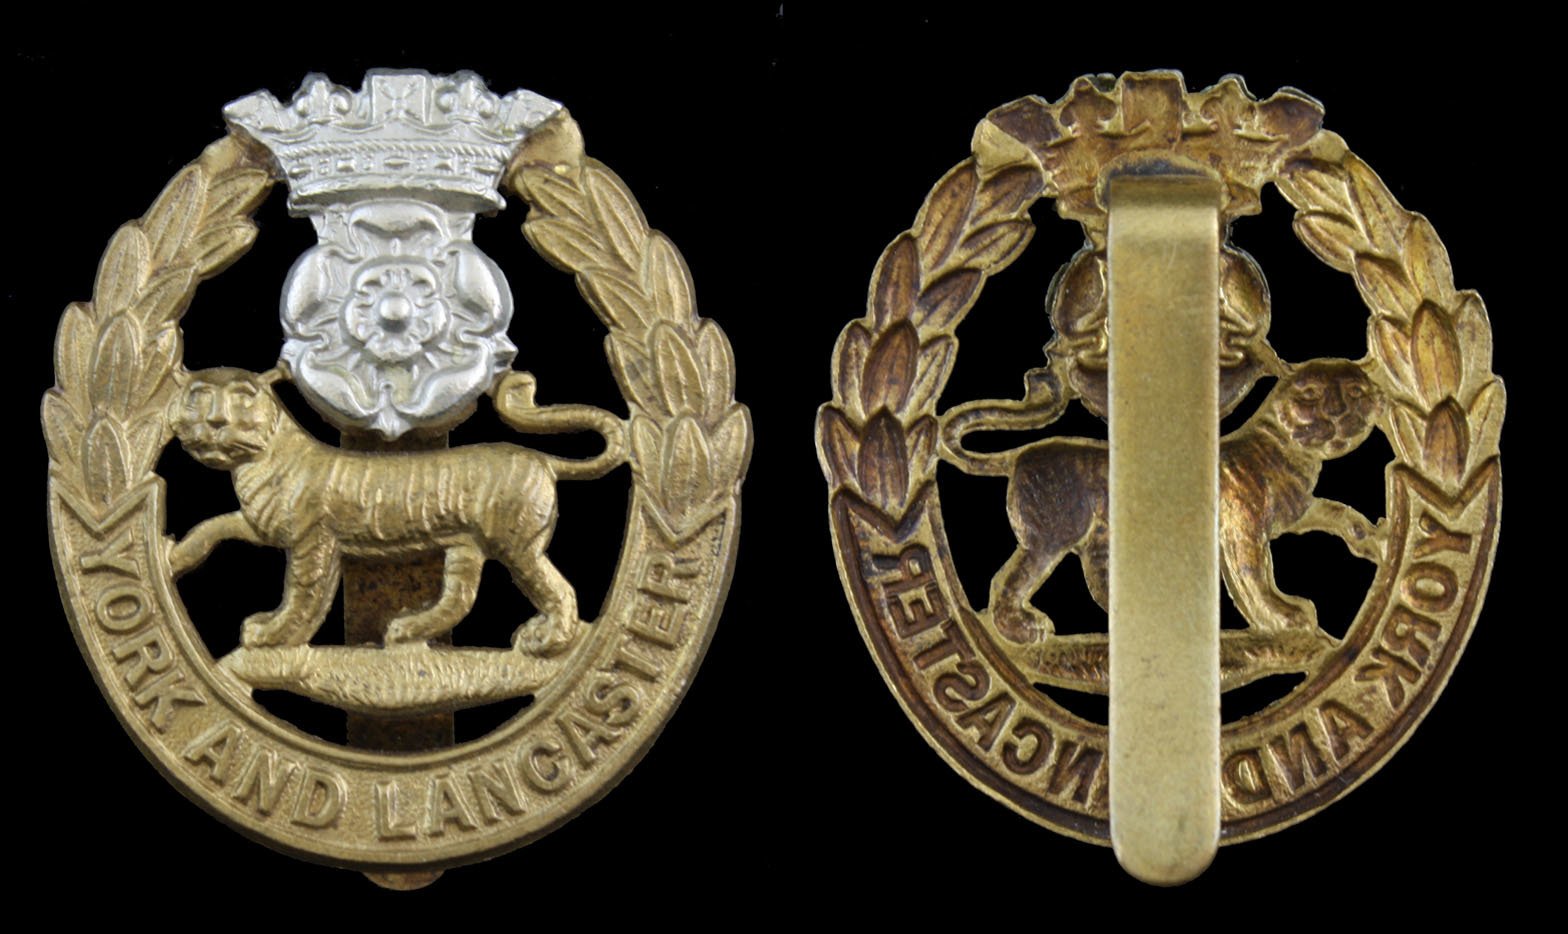 Tiger and Rose Badge with Missing Rose